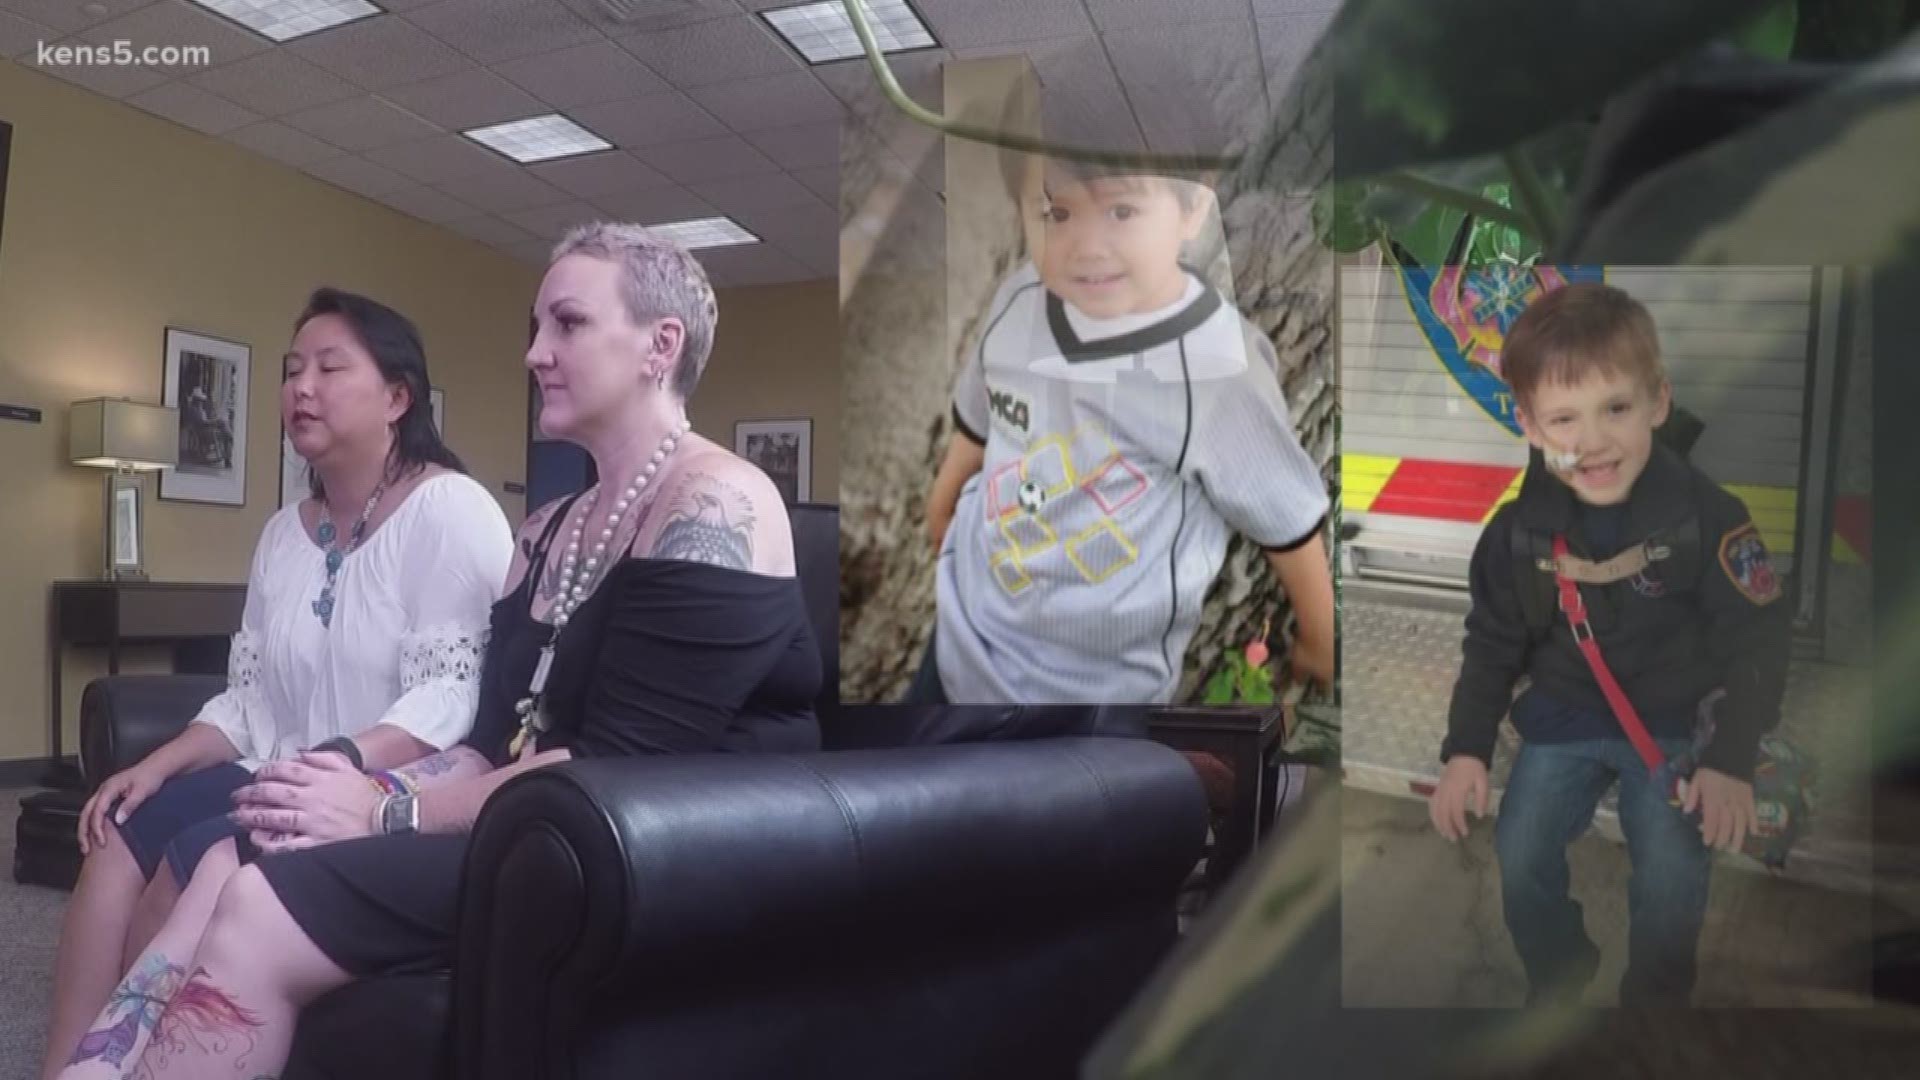 After losing their children to cancer, two San Antonio moms realized there wasn't enough knowledge about cancer in kids. So they fought for more funding, and won.